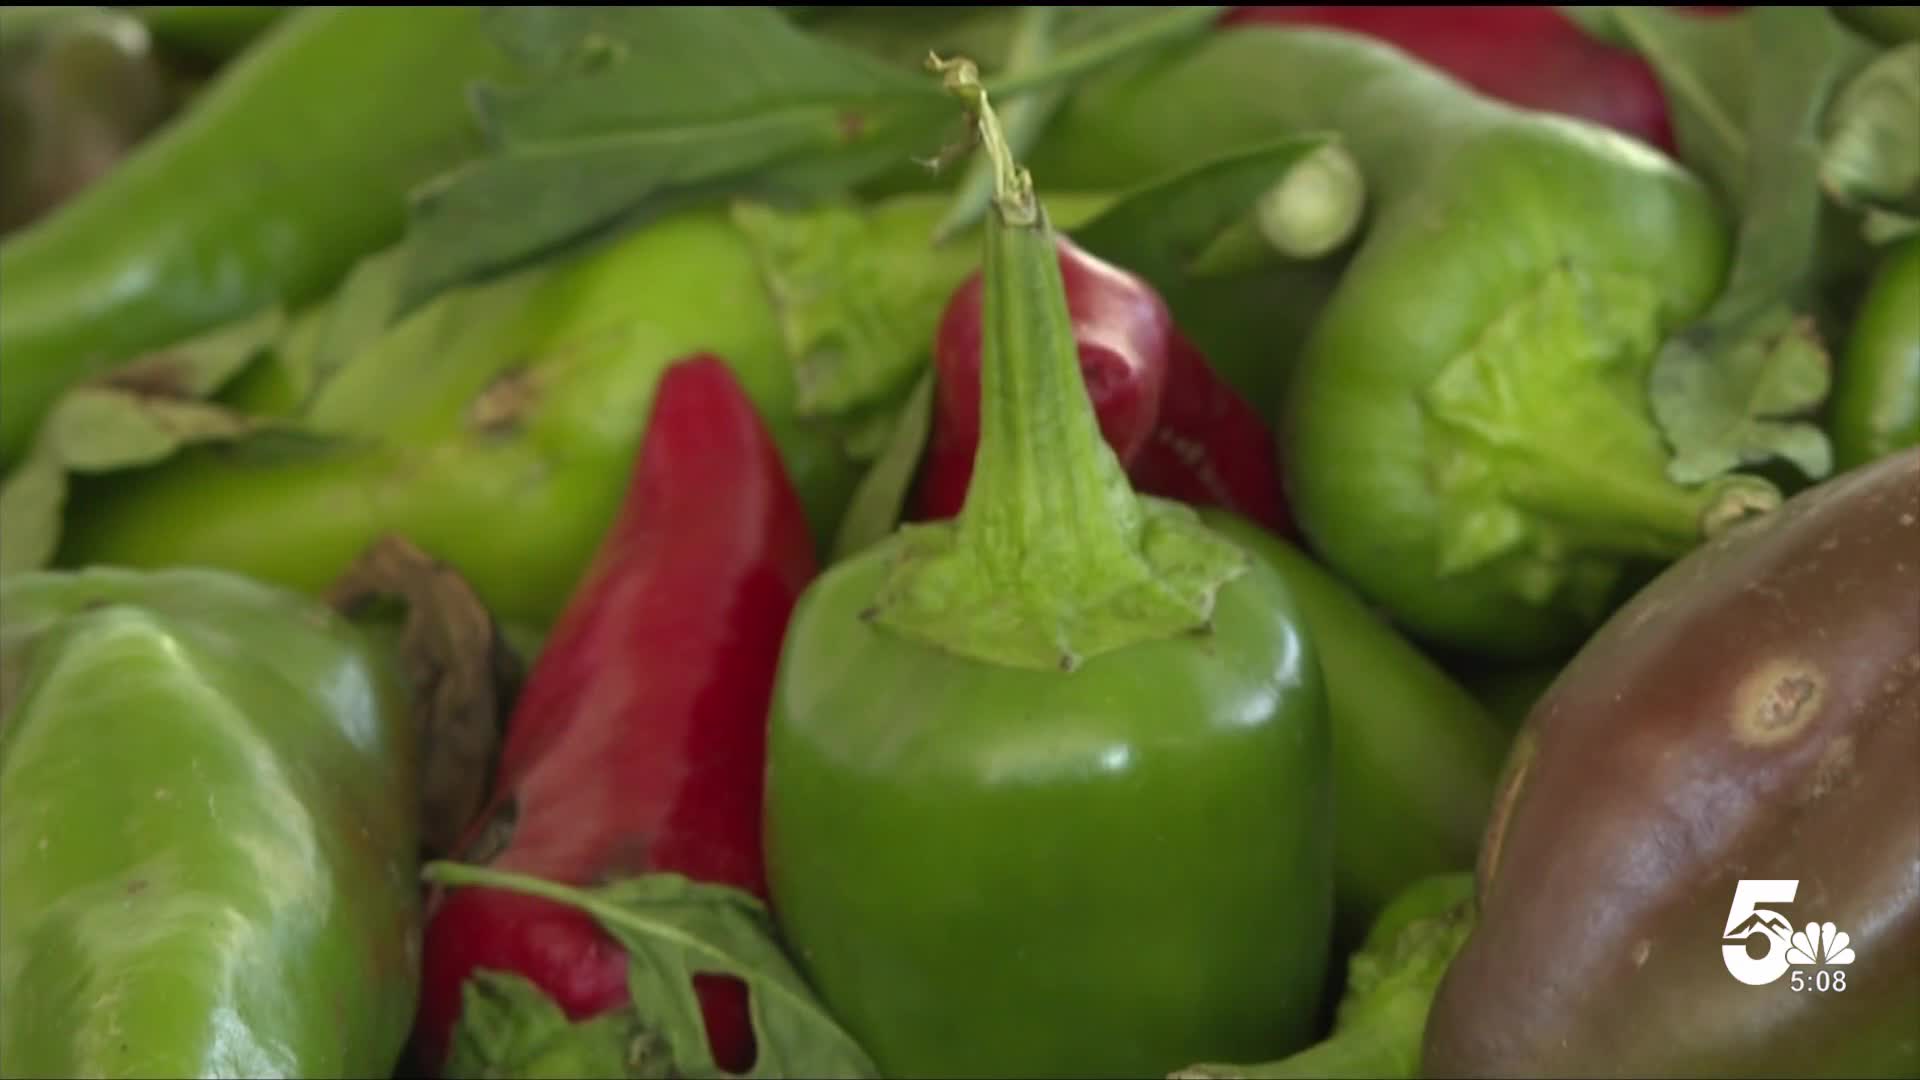 WATCH: Pueblo's chile season begins with planting, one farmer is confident this season